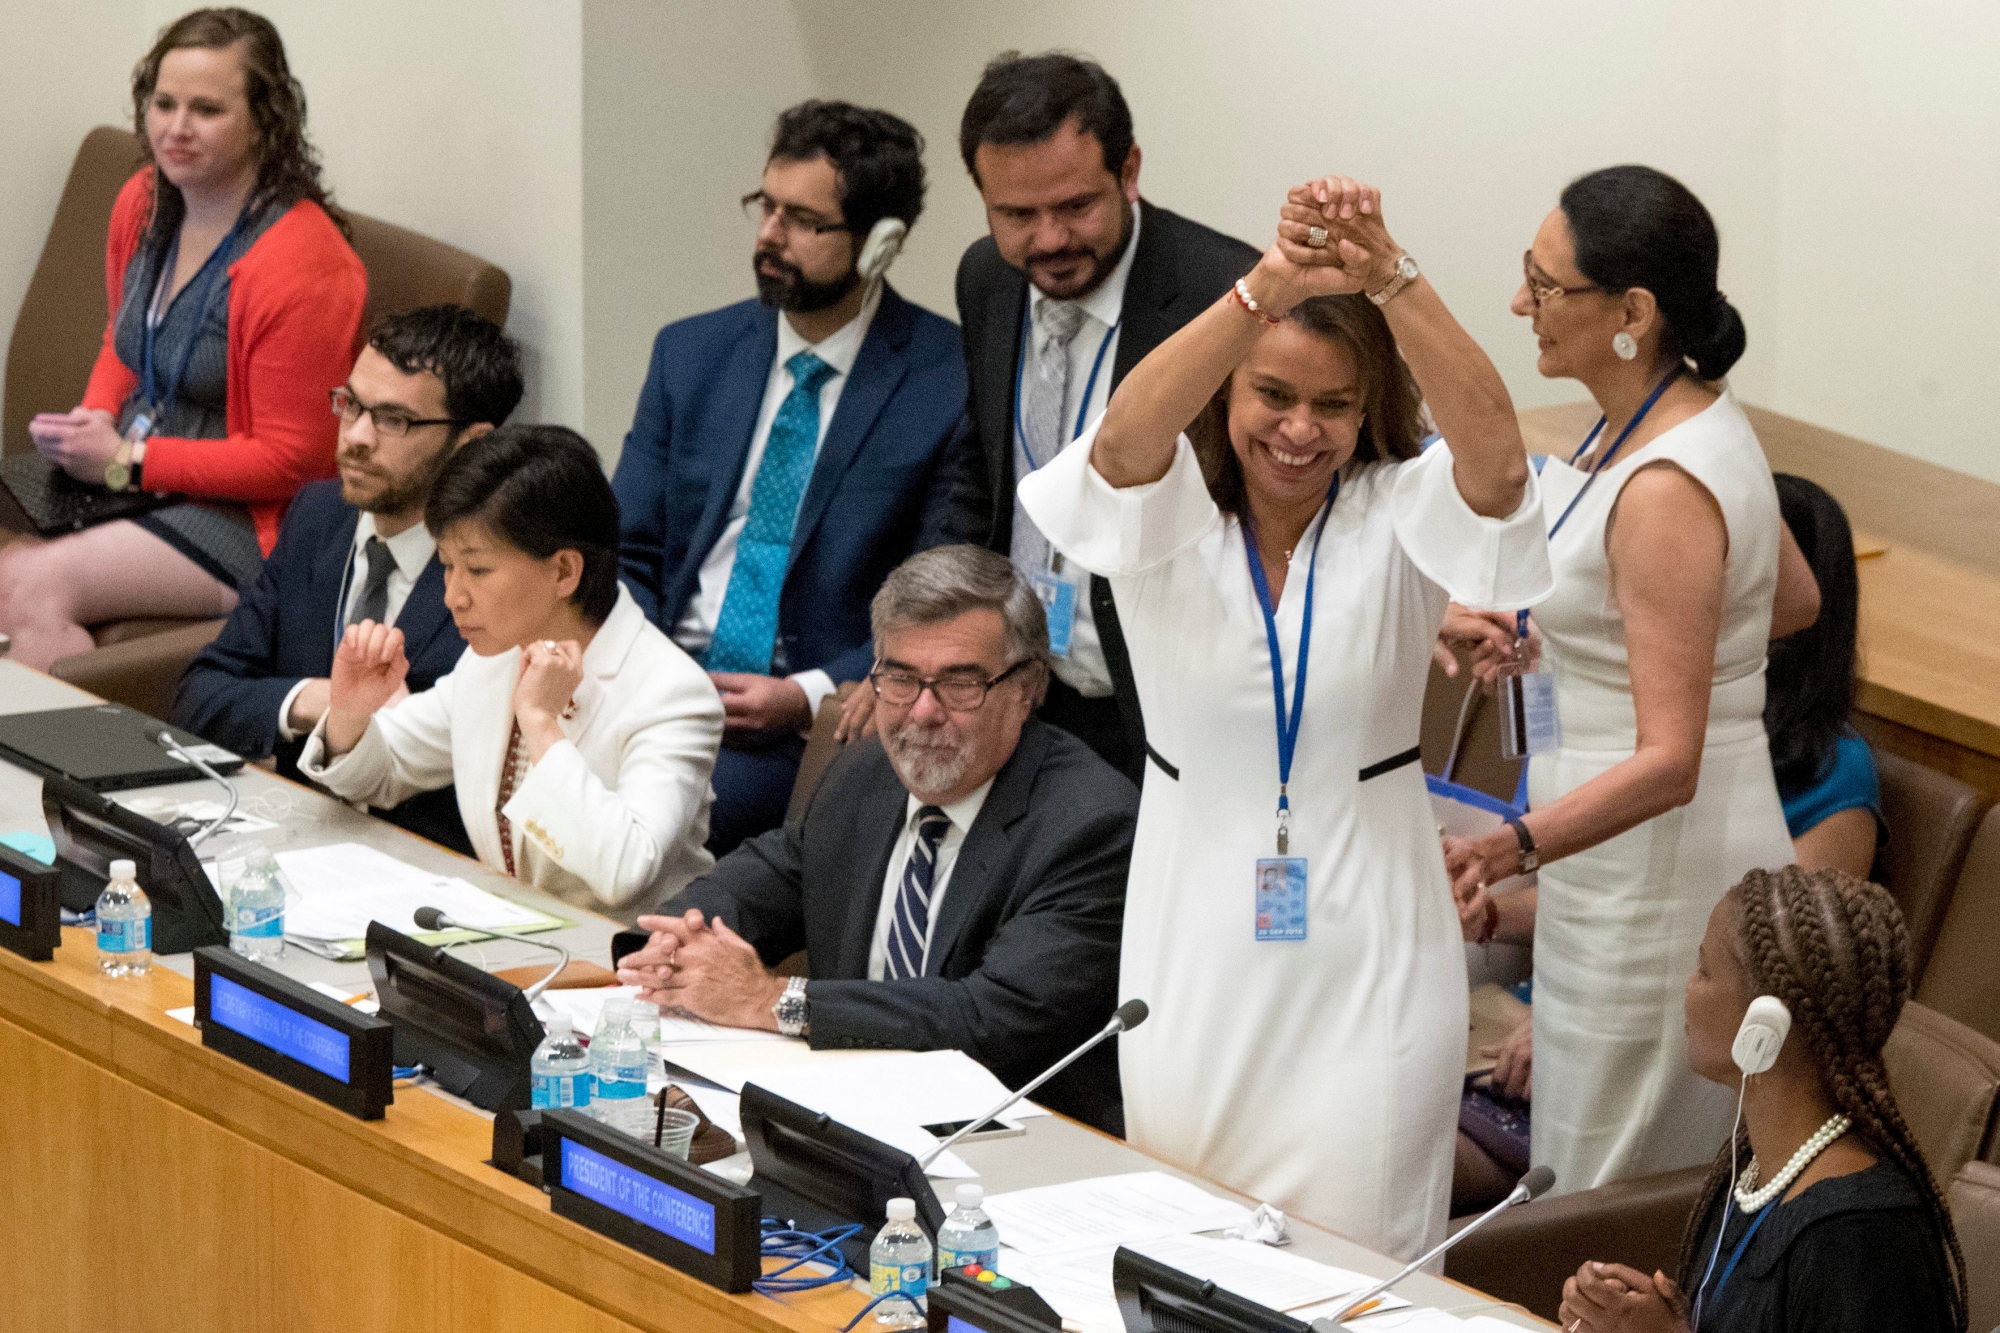 Costa Rican Ambassador Elayne Whyte Gomez, President of the United Nations Conference to Negotiate a Legally Binding Instrument to Prohibit Nuclear Weapons, reacts after a vote by the conference to adopt a legally binding instrument to prohibit nuclear weapons, leading towards their total elimination, Friday, July 7, 2017 at United Nations headquarters. More than 120 countries have approved the first-ever treaty banning nuclear weapons at a U.N. meeting boycotted by all nuclear-armed nations. Friday's vote was 122 countries in favor with the Netherlands opposed and Singapore abstaining.(AP Photo/Mary Altaffer) UN Nuclear Treaty